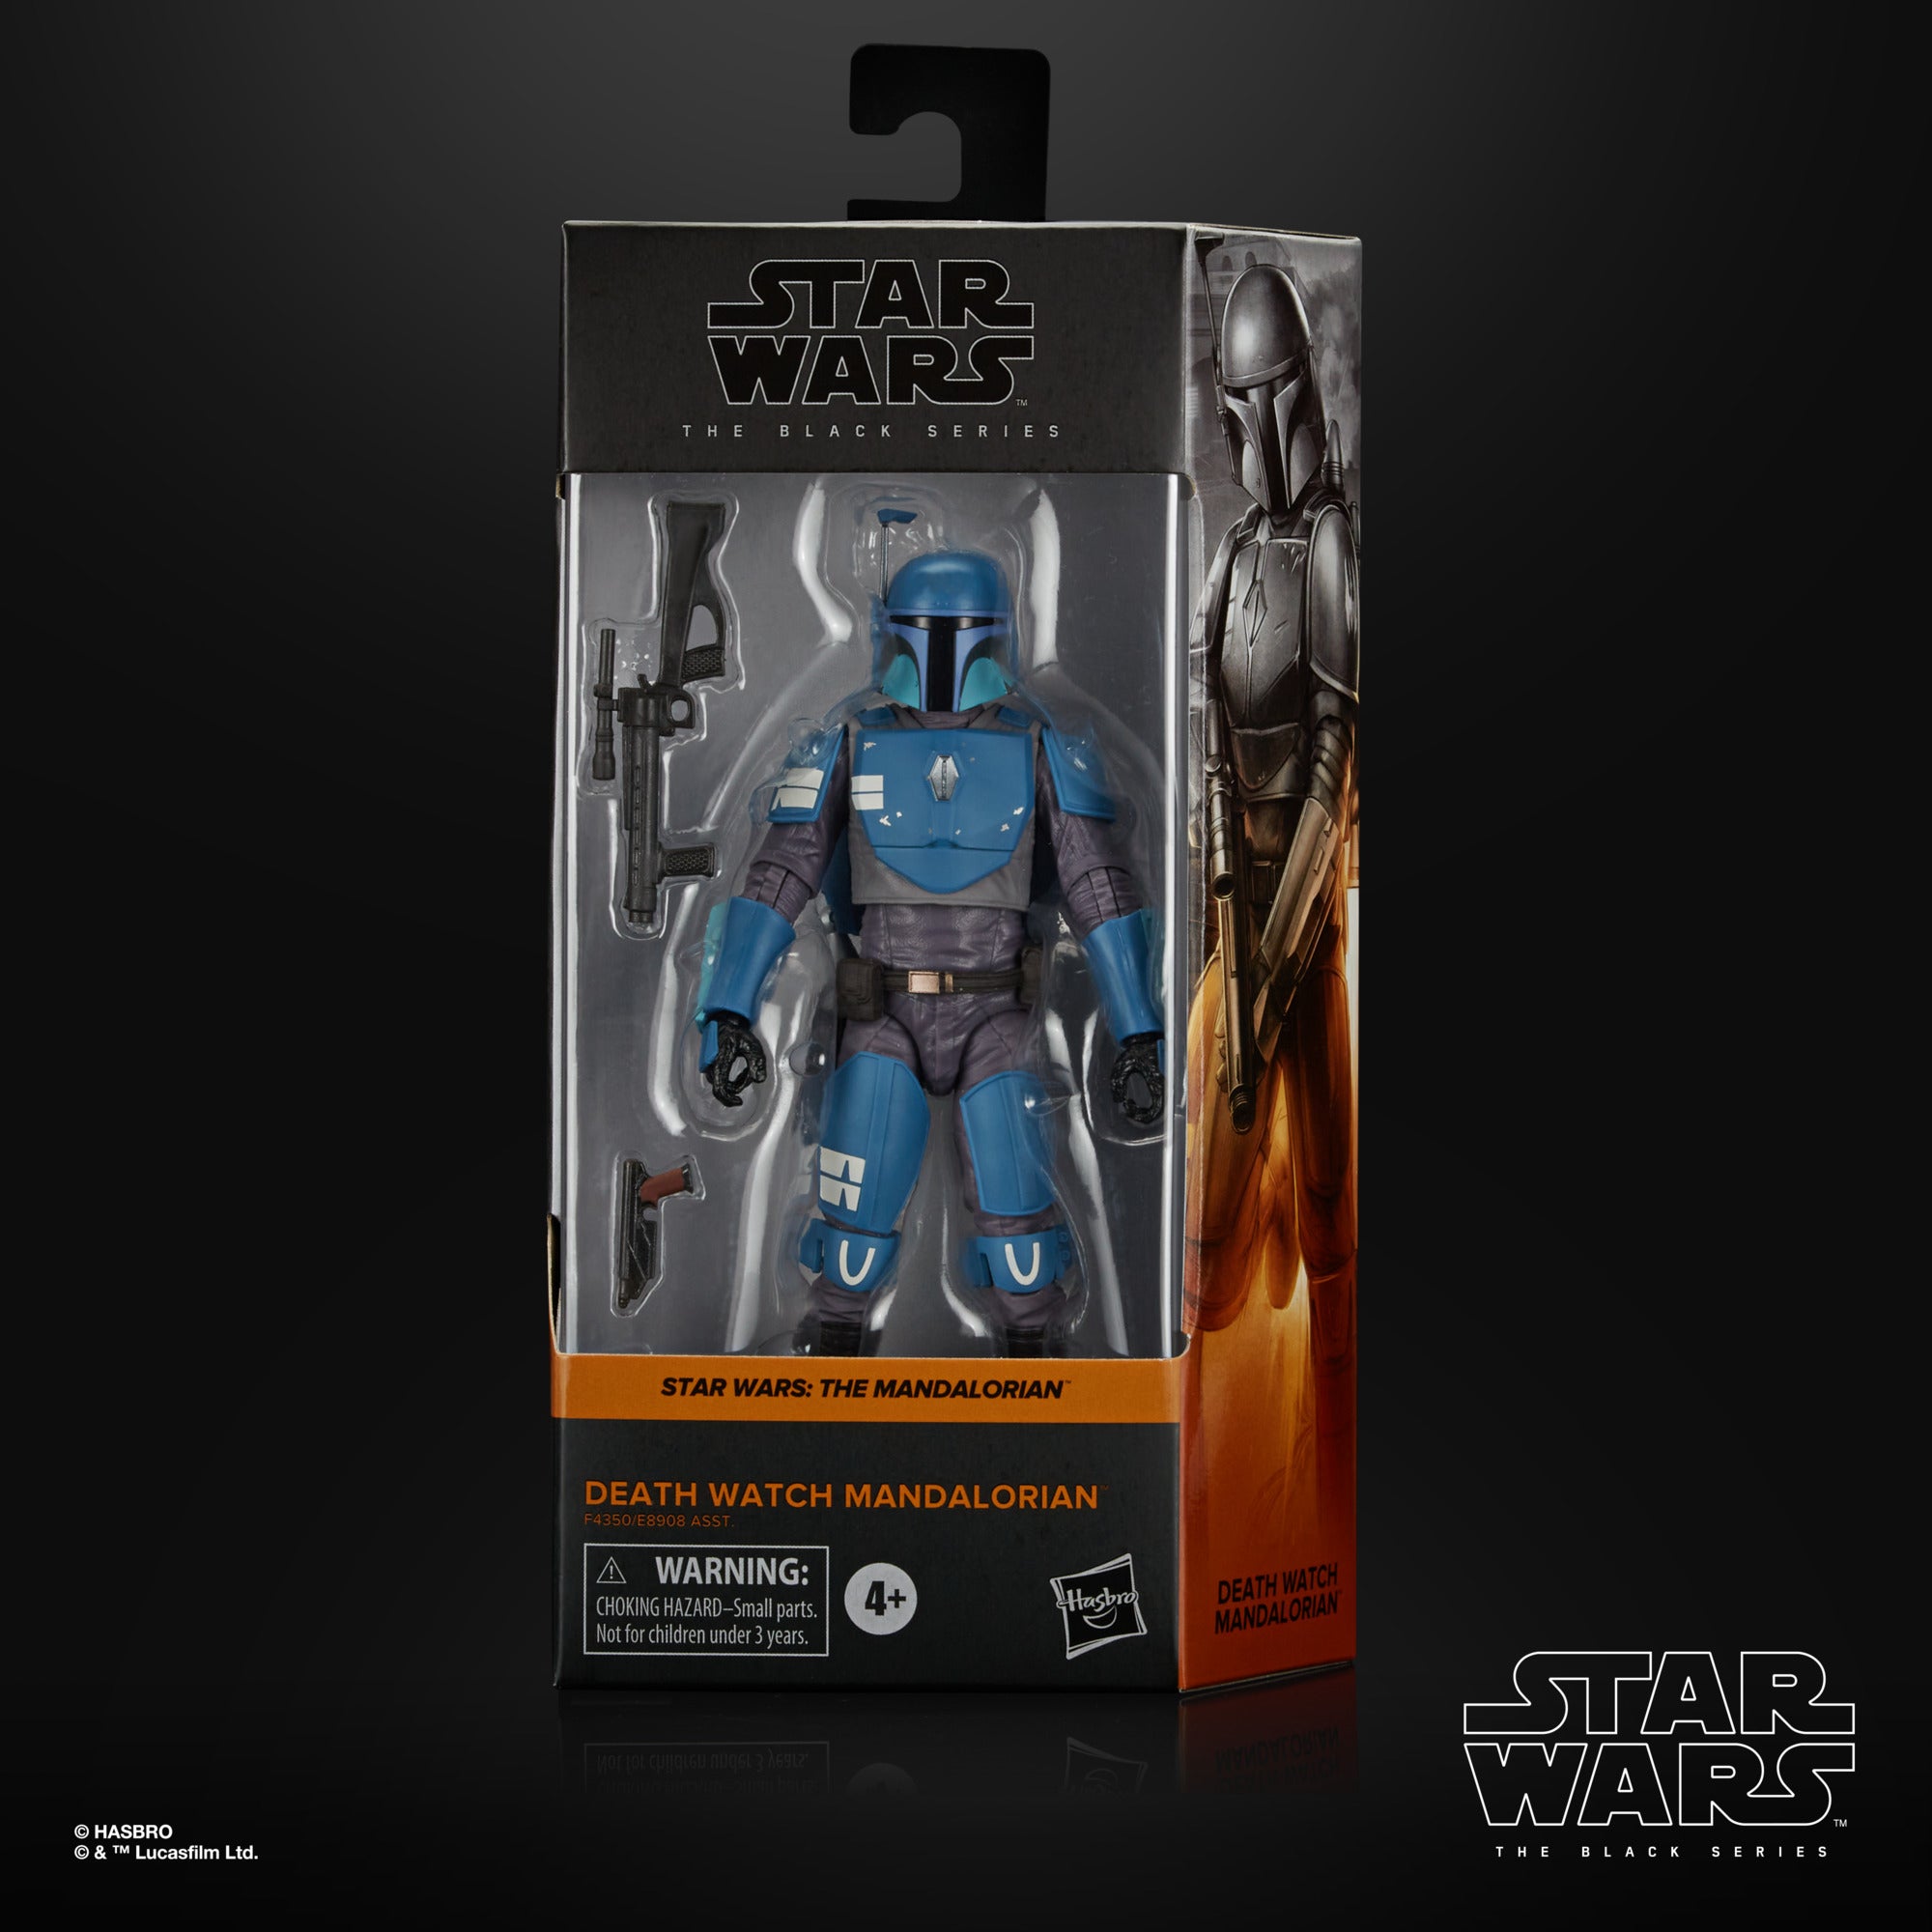 [COLLECTION] HASBRO / BLACK SERIES - Page 3 F4350_PROD_SW_BL_JACKSONVILLE_0001_Online_2000SQ_2000x